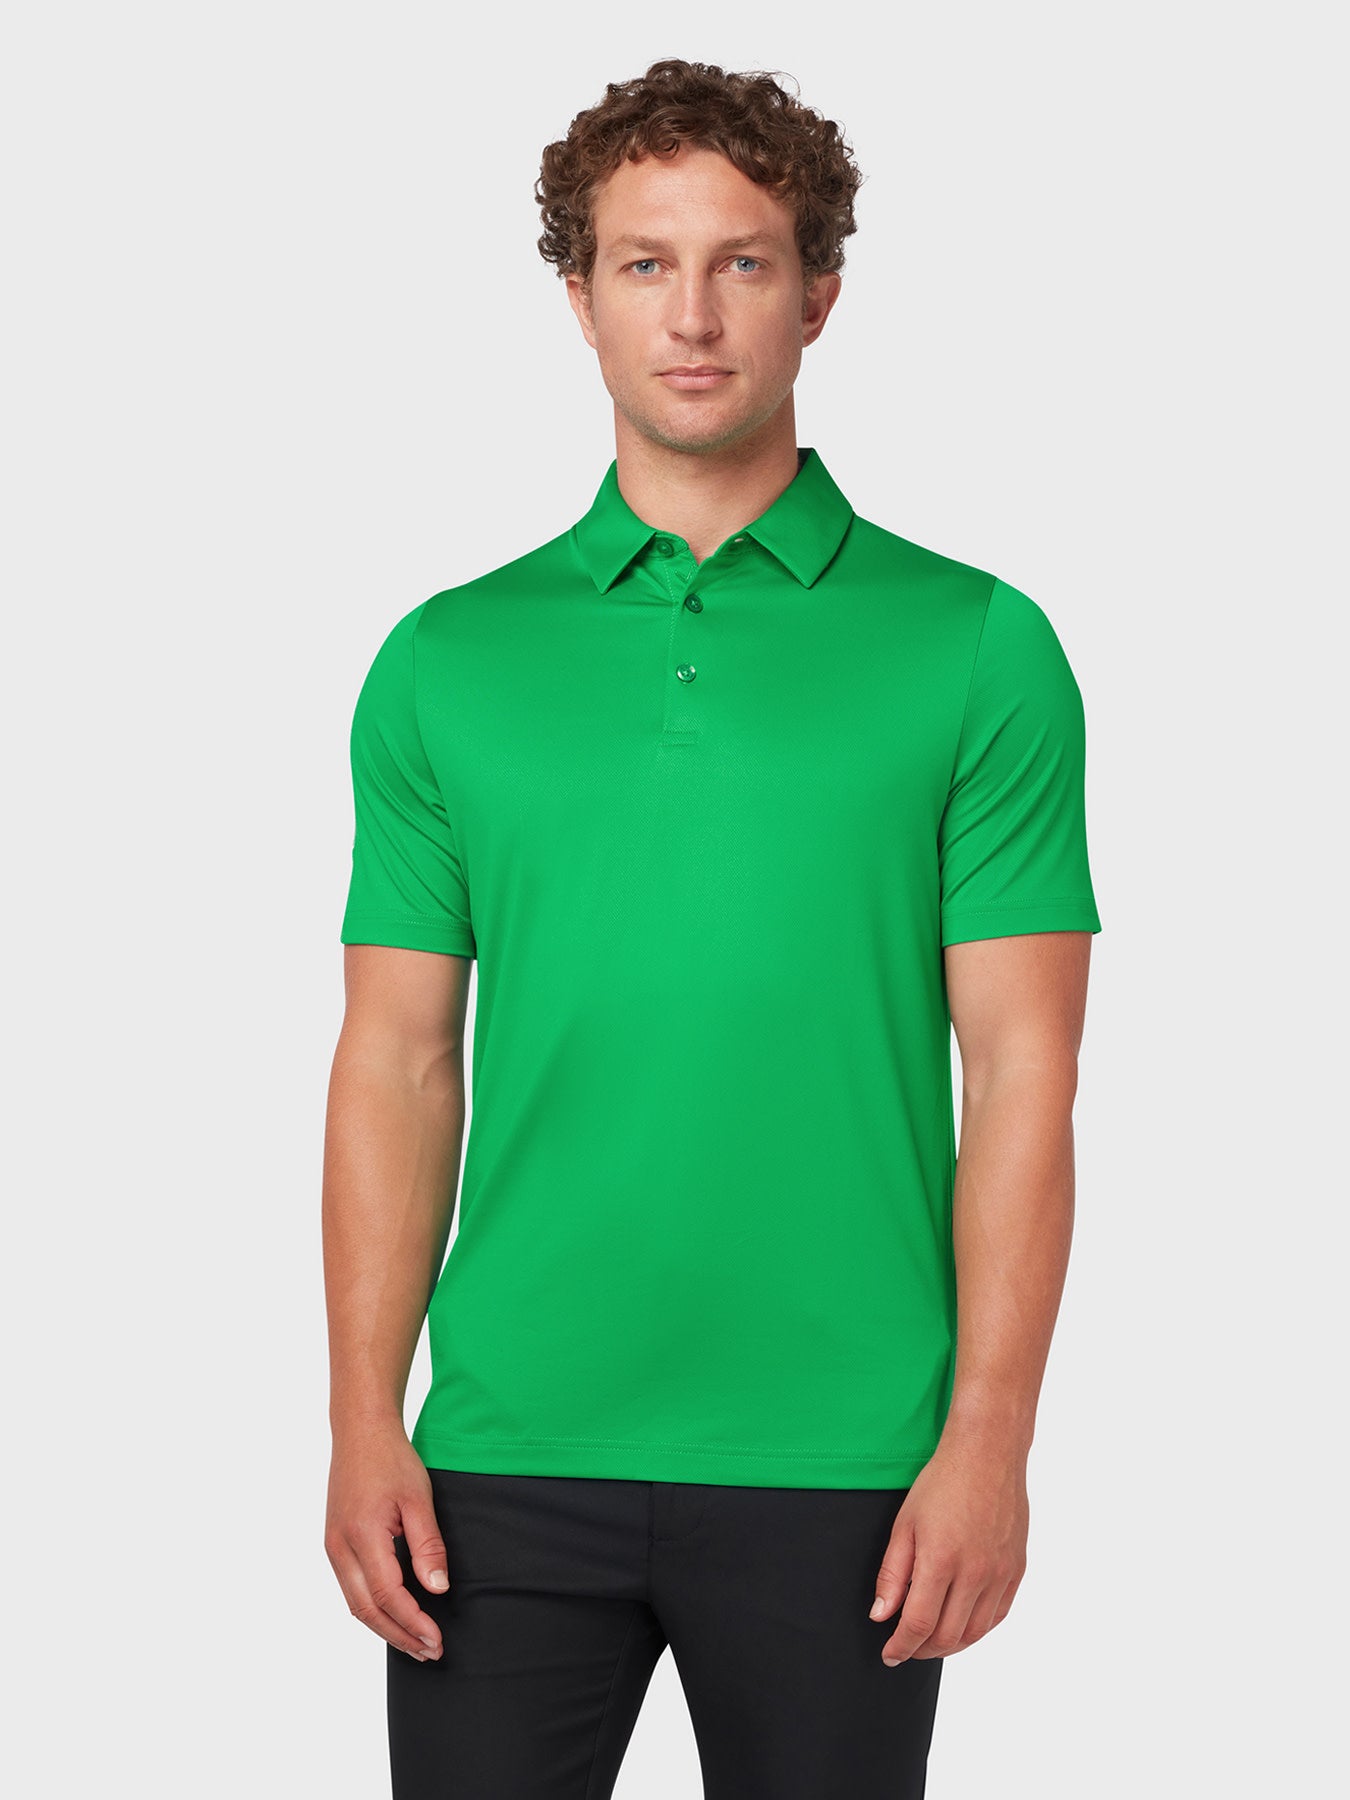 View Swing Tech Tour Polo In Golf Green Golf Green S information